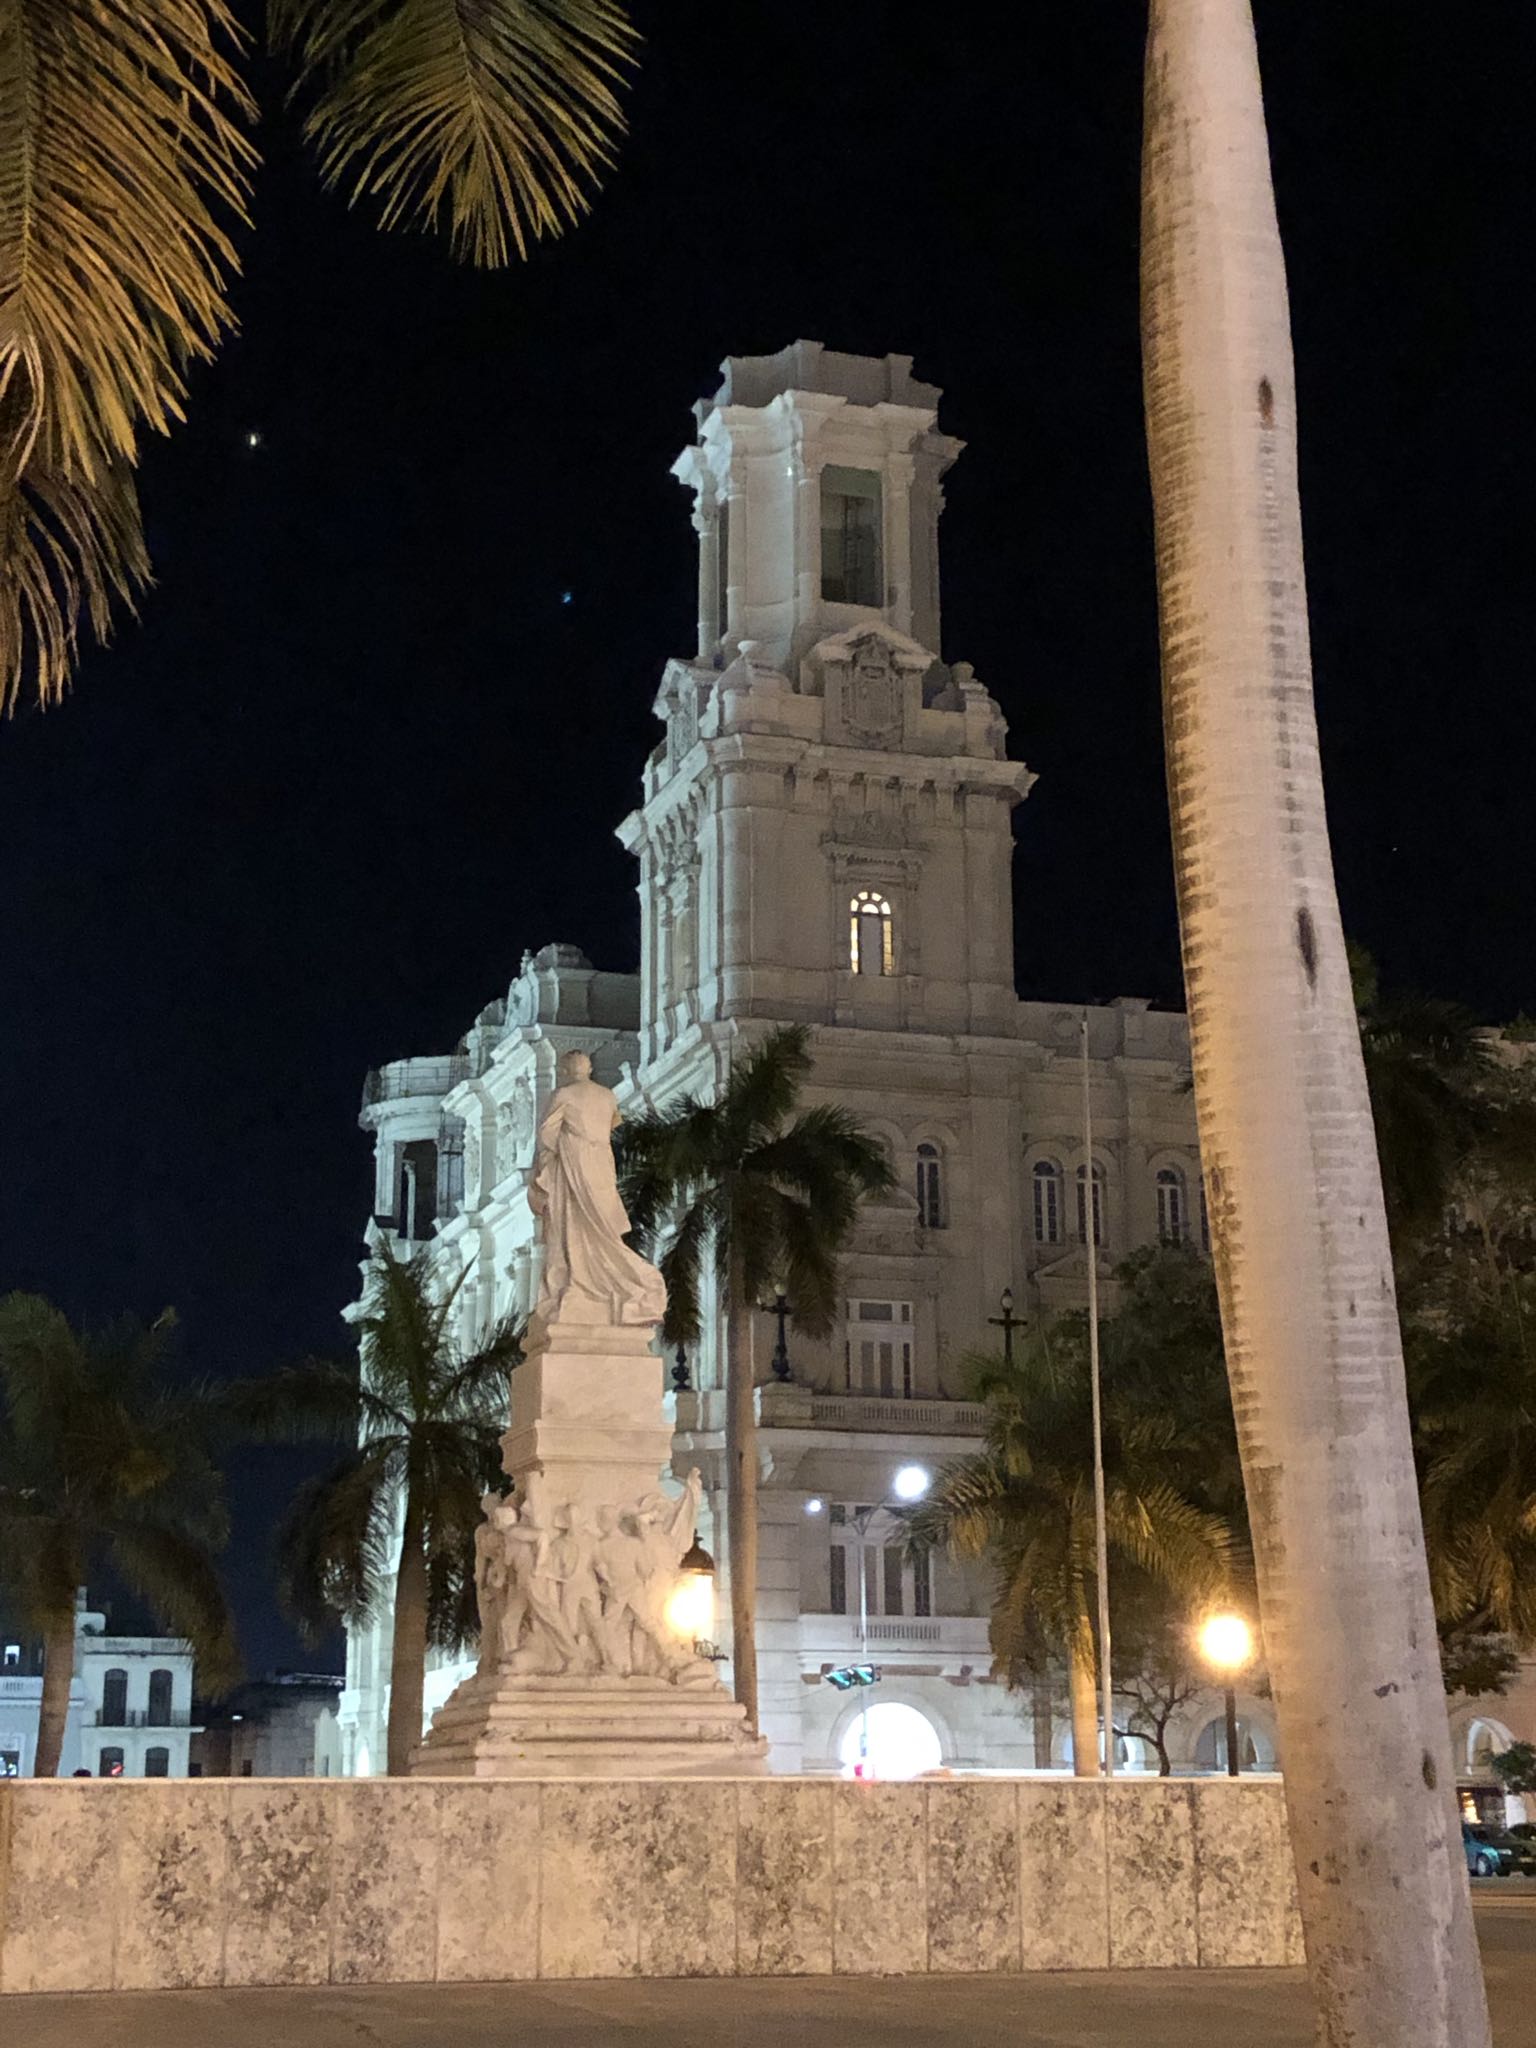 Photo 148 of 221 from the album Highlights Cuba 2019.